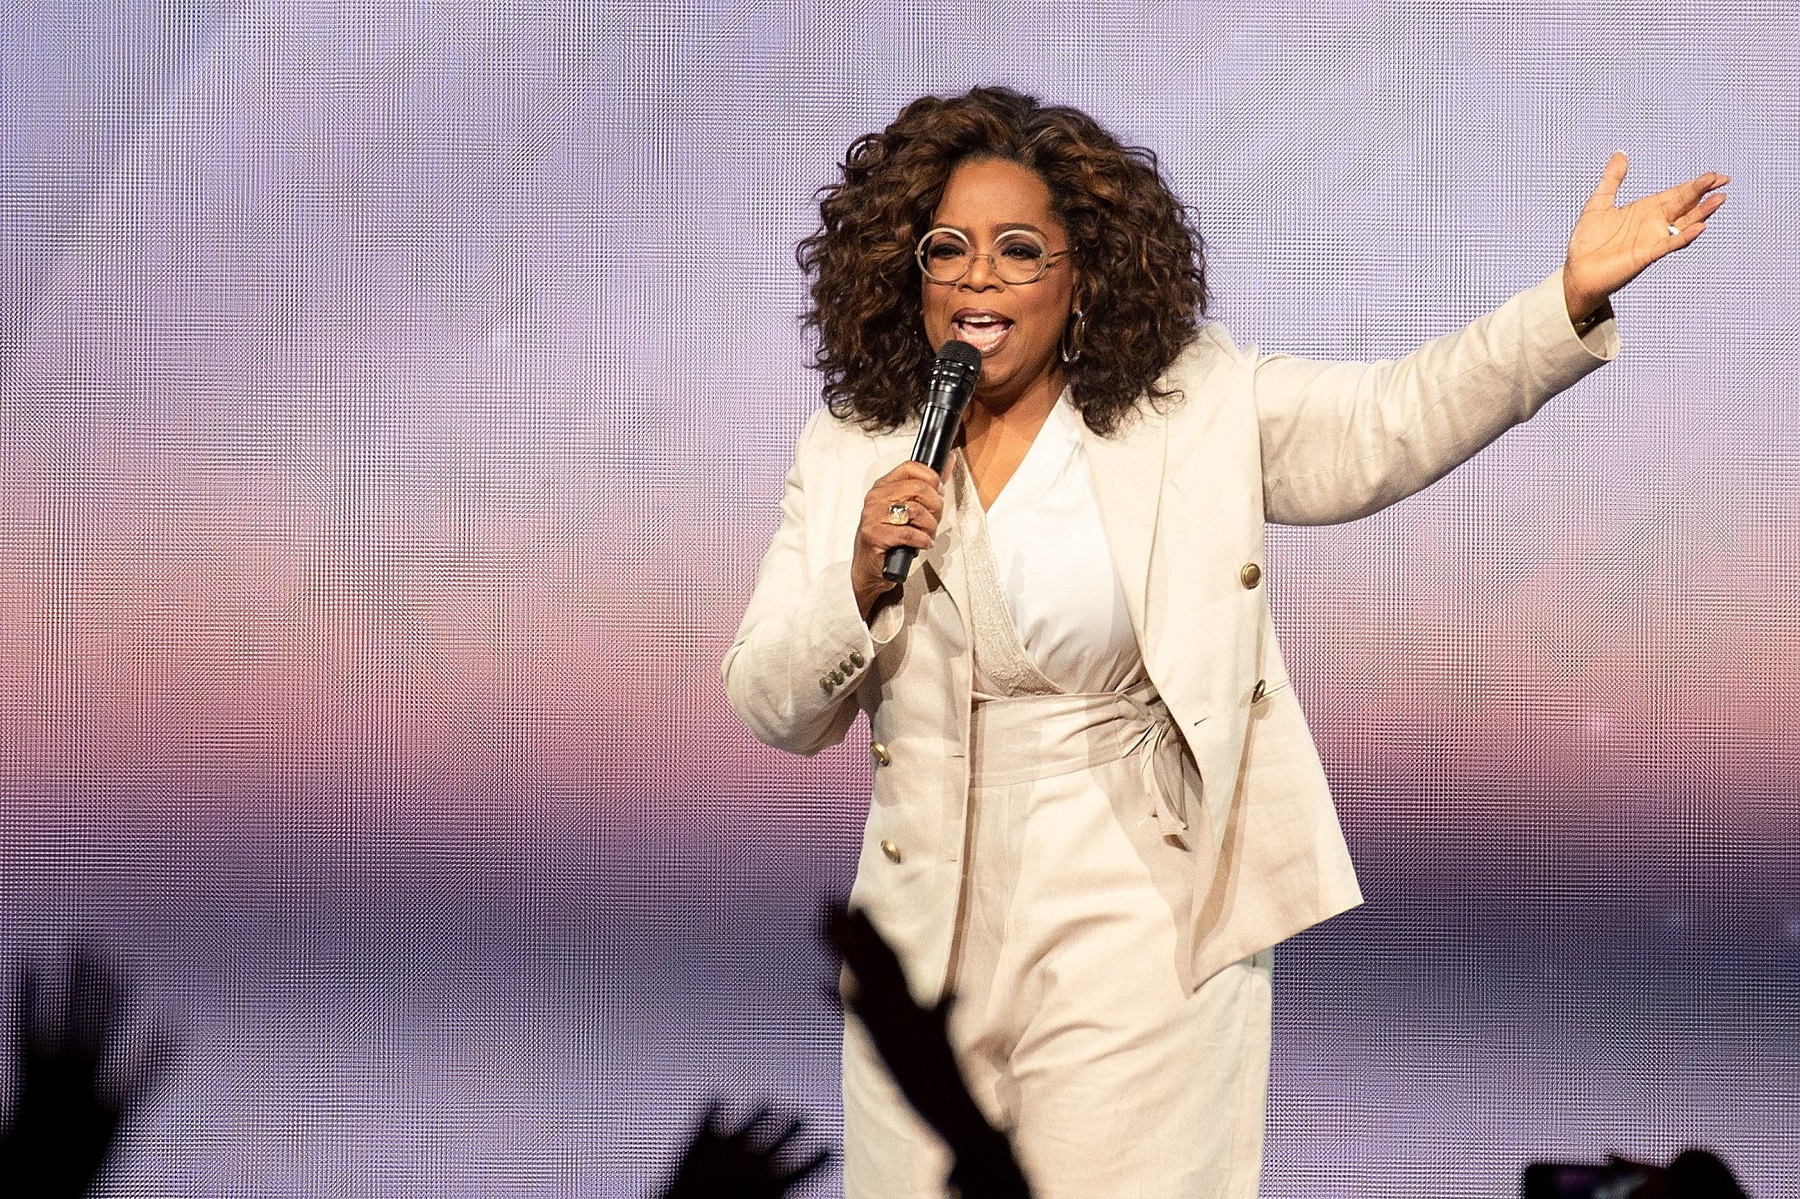 Oprah Winfrey
Oprah's 2020 Vision: Your Life in Focus, Chase Center, San Francisco, USA - 22 Feb 2020,Image: 500327815, License: Rights-managed, Restrictions: , Model Release: no, Credit line: imageSPACE / Shutterstock Editorial / Profimedia